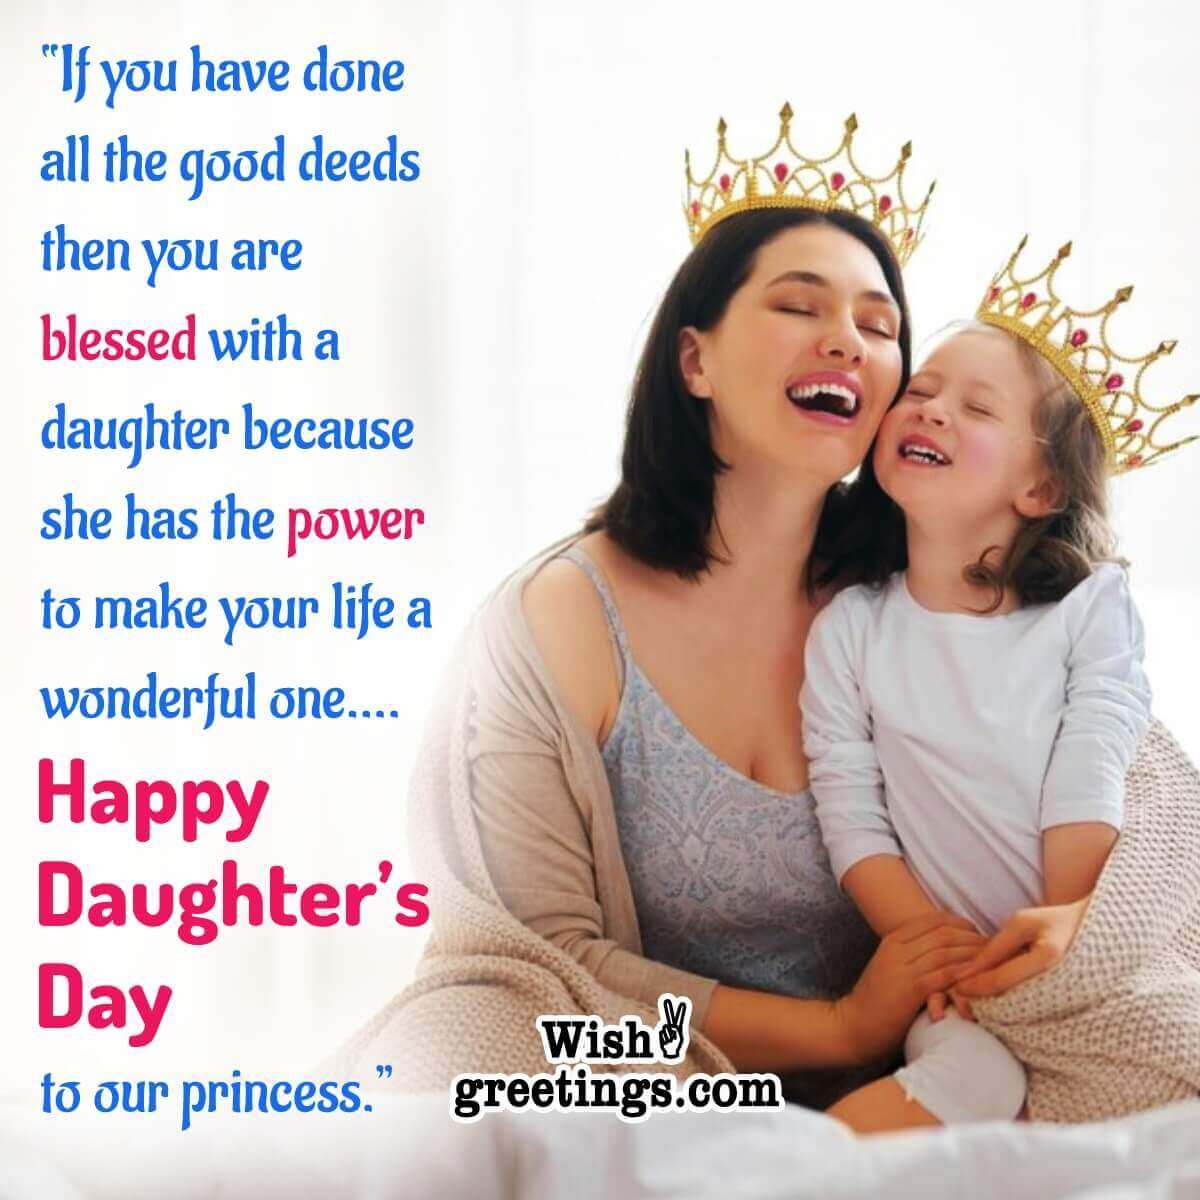 Happy Daughter’s Day To Our Princess